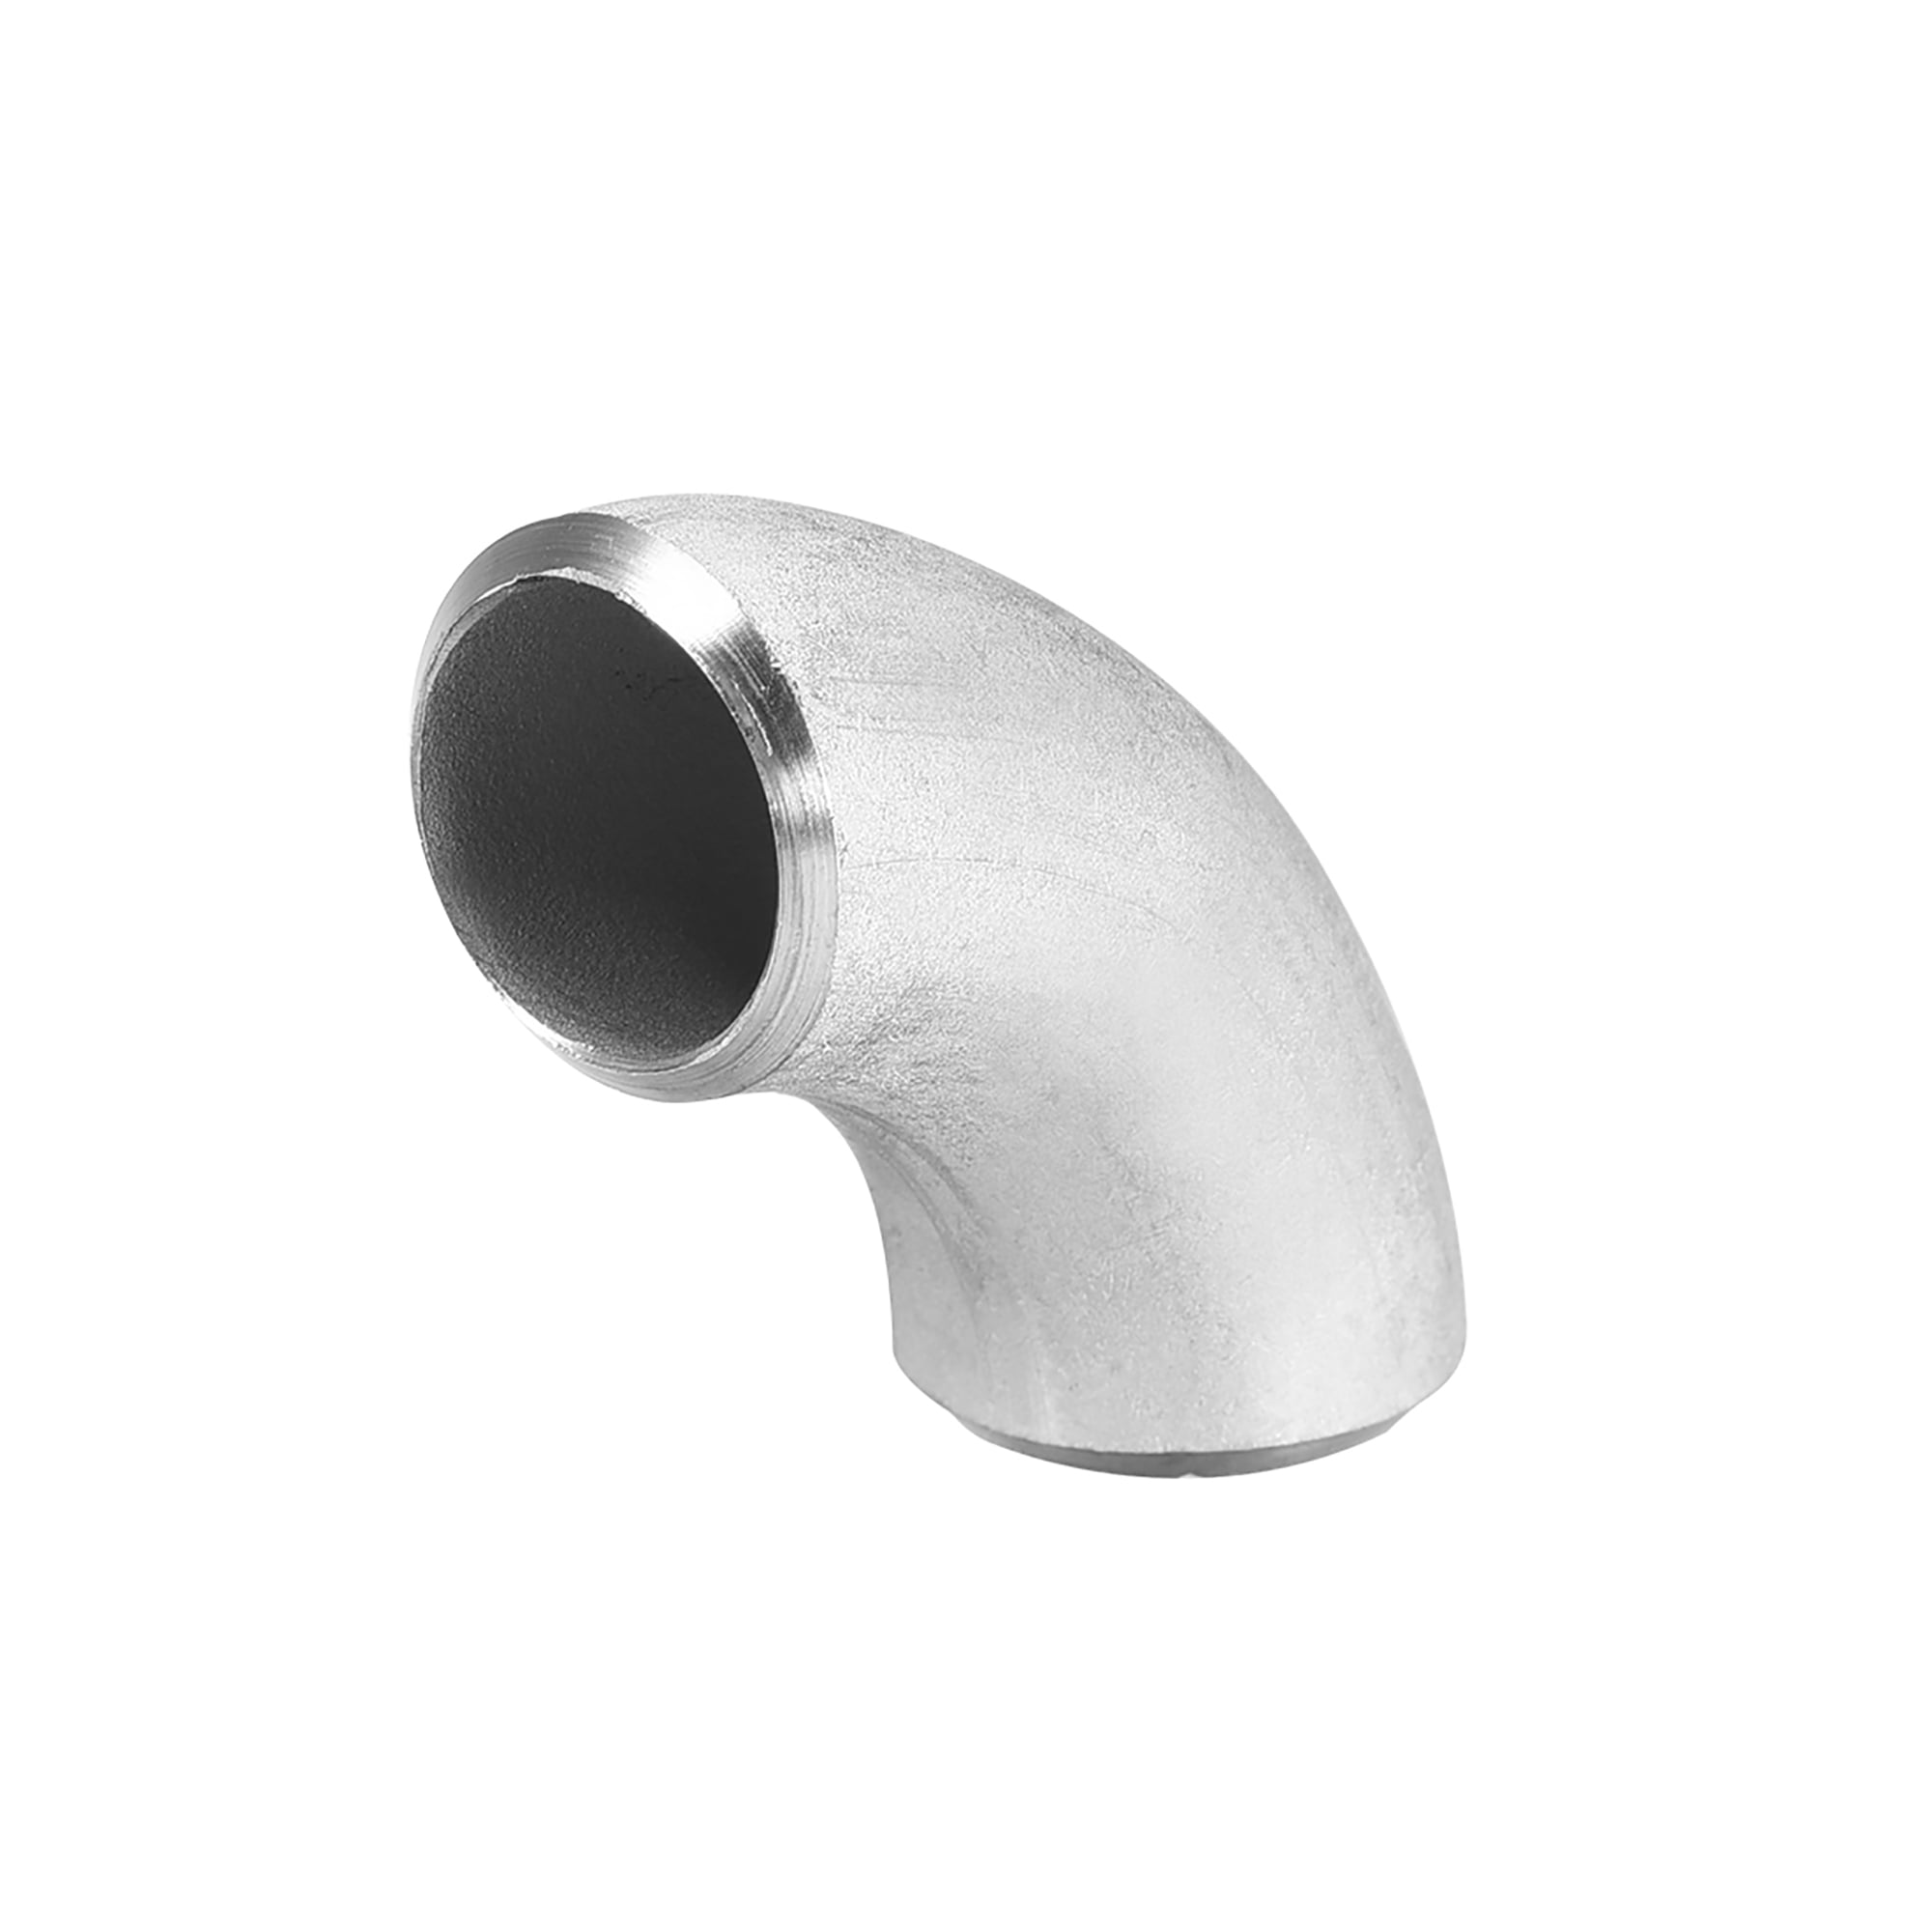 Stainless Steel 304 Pipe Fitting 90Degree Elbow Butt-Weld 1-1/2"OD 0.85mm T 4pcs 